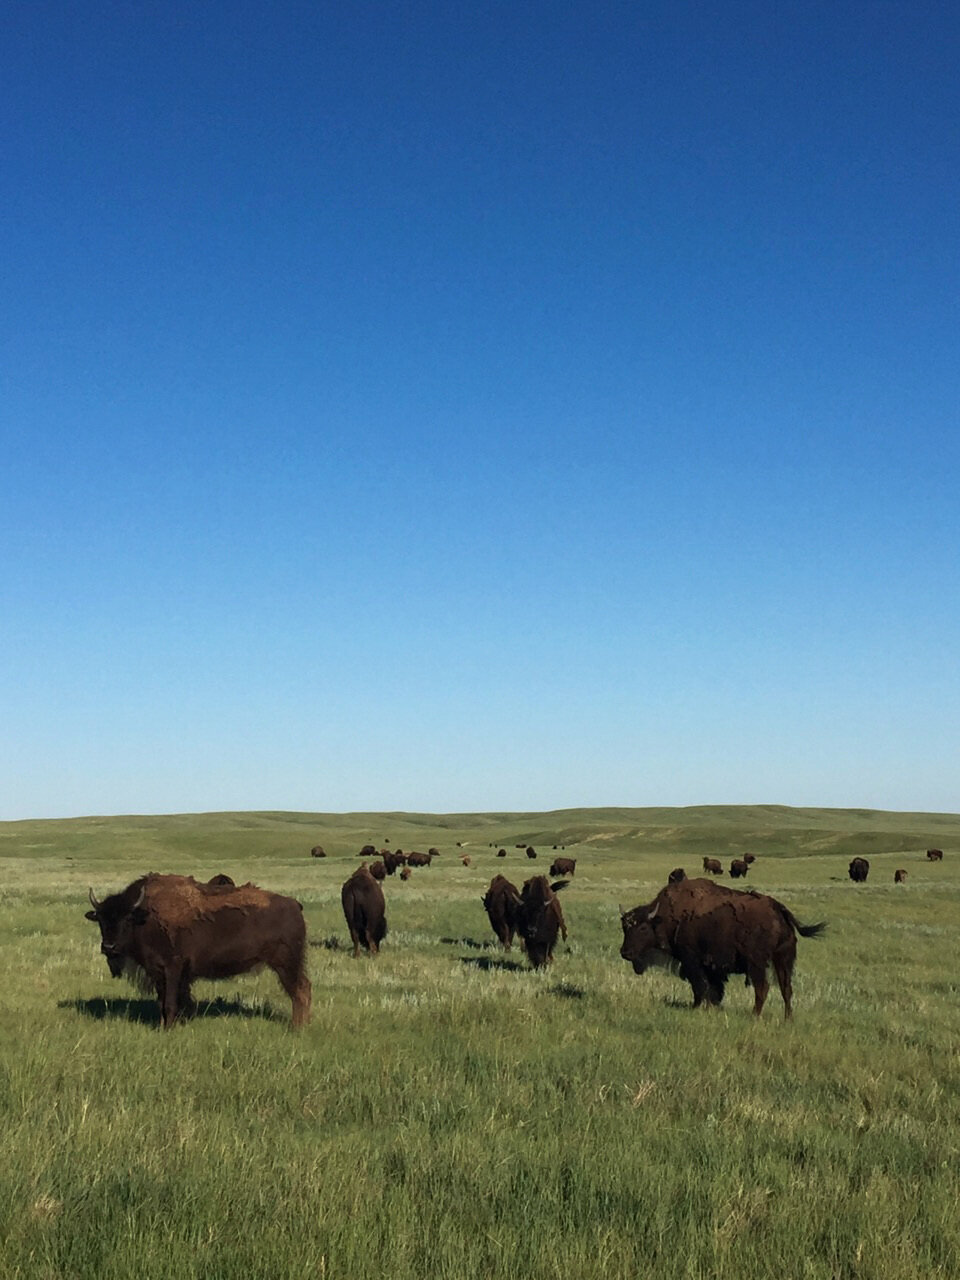 CHALLENGES OF SAVING WILD BISON | WNYC's The Takeaway, 5/9/17